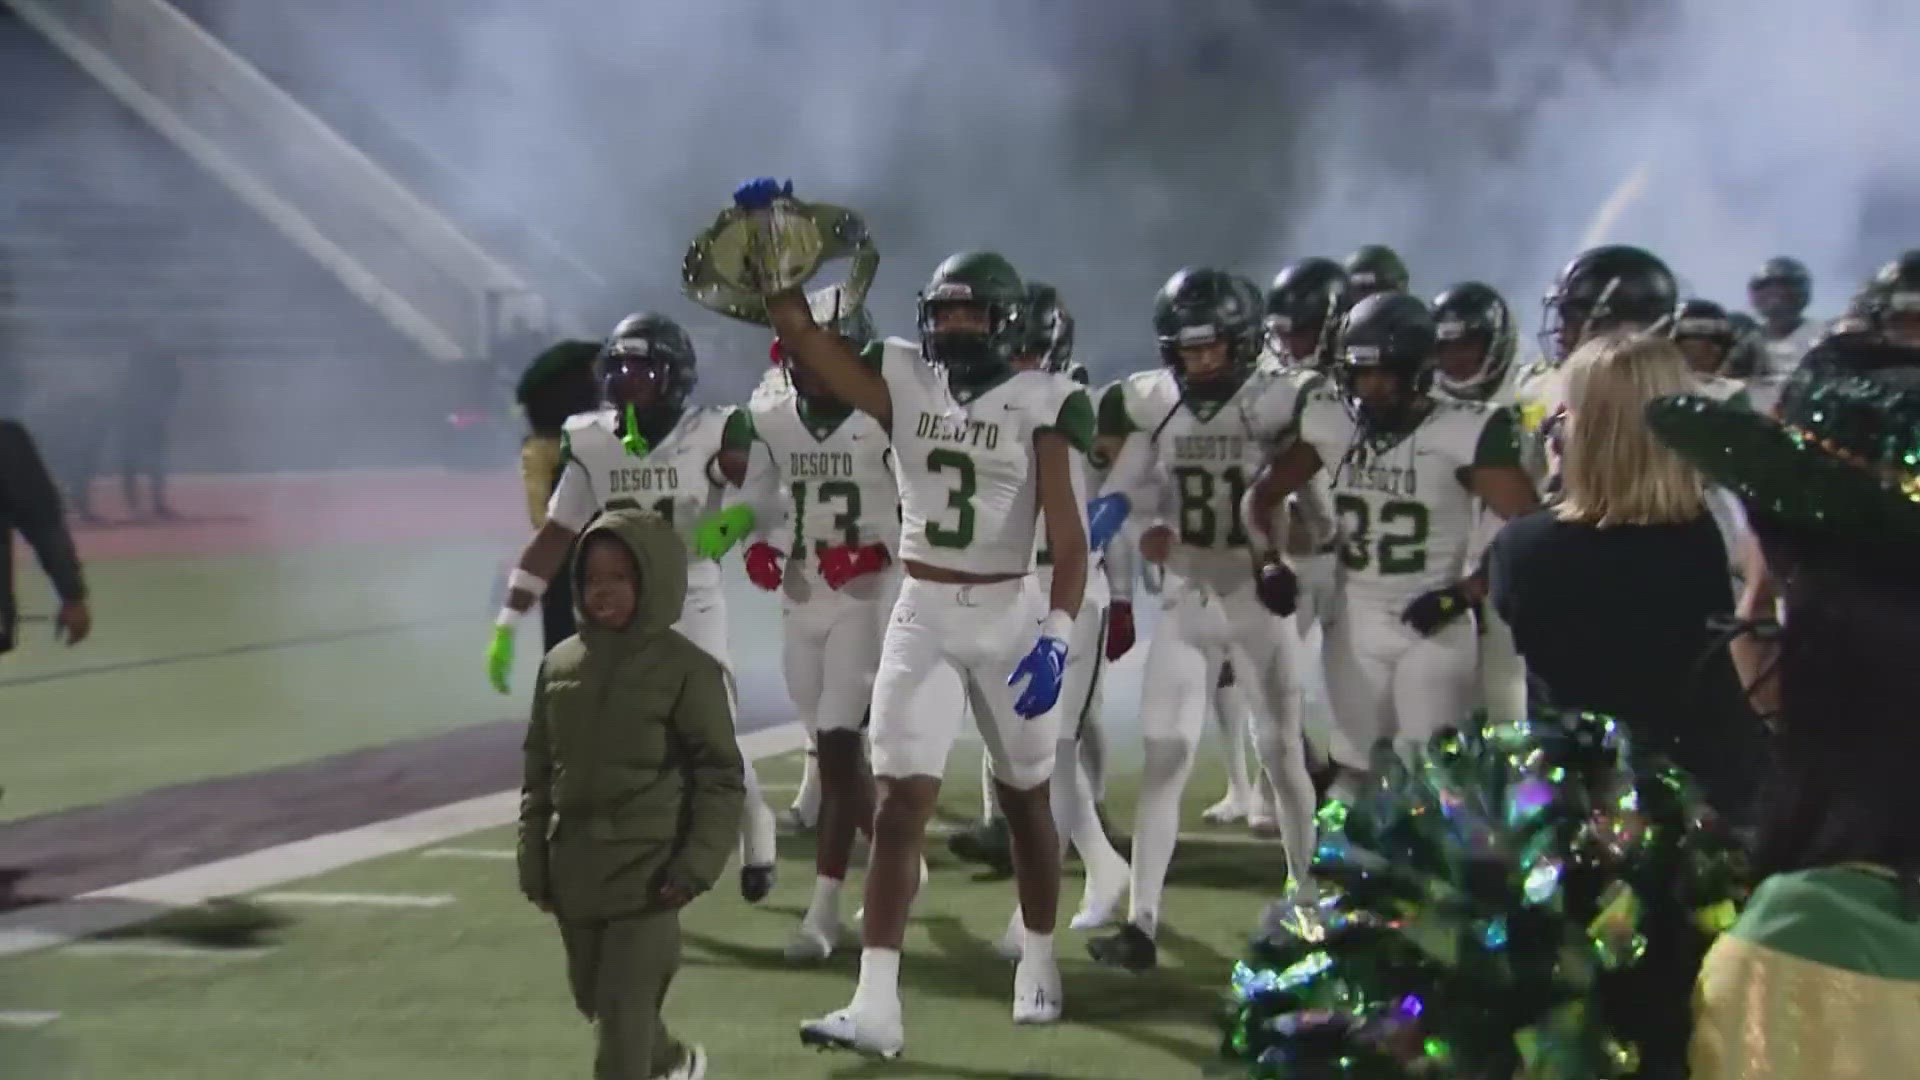 Here's a look at the state quarterfinal round of high school football games across Texas.